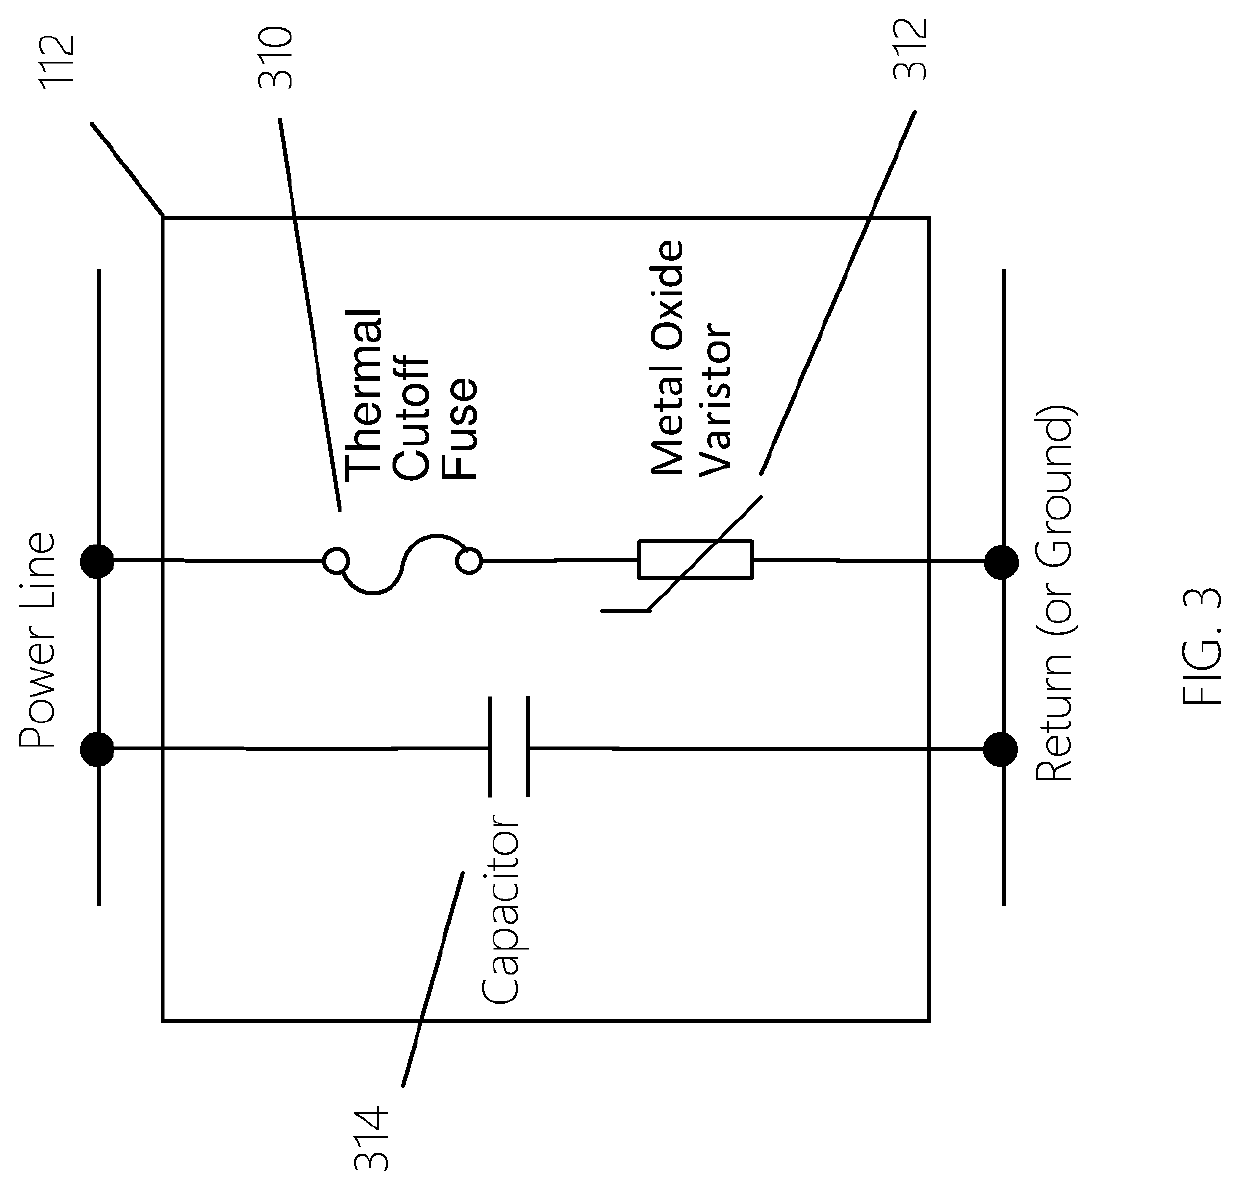 Surge protection device for complex transients